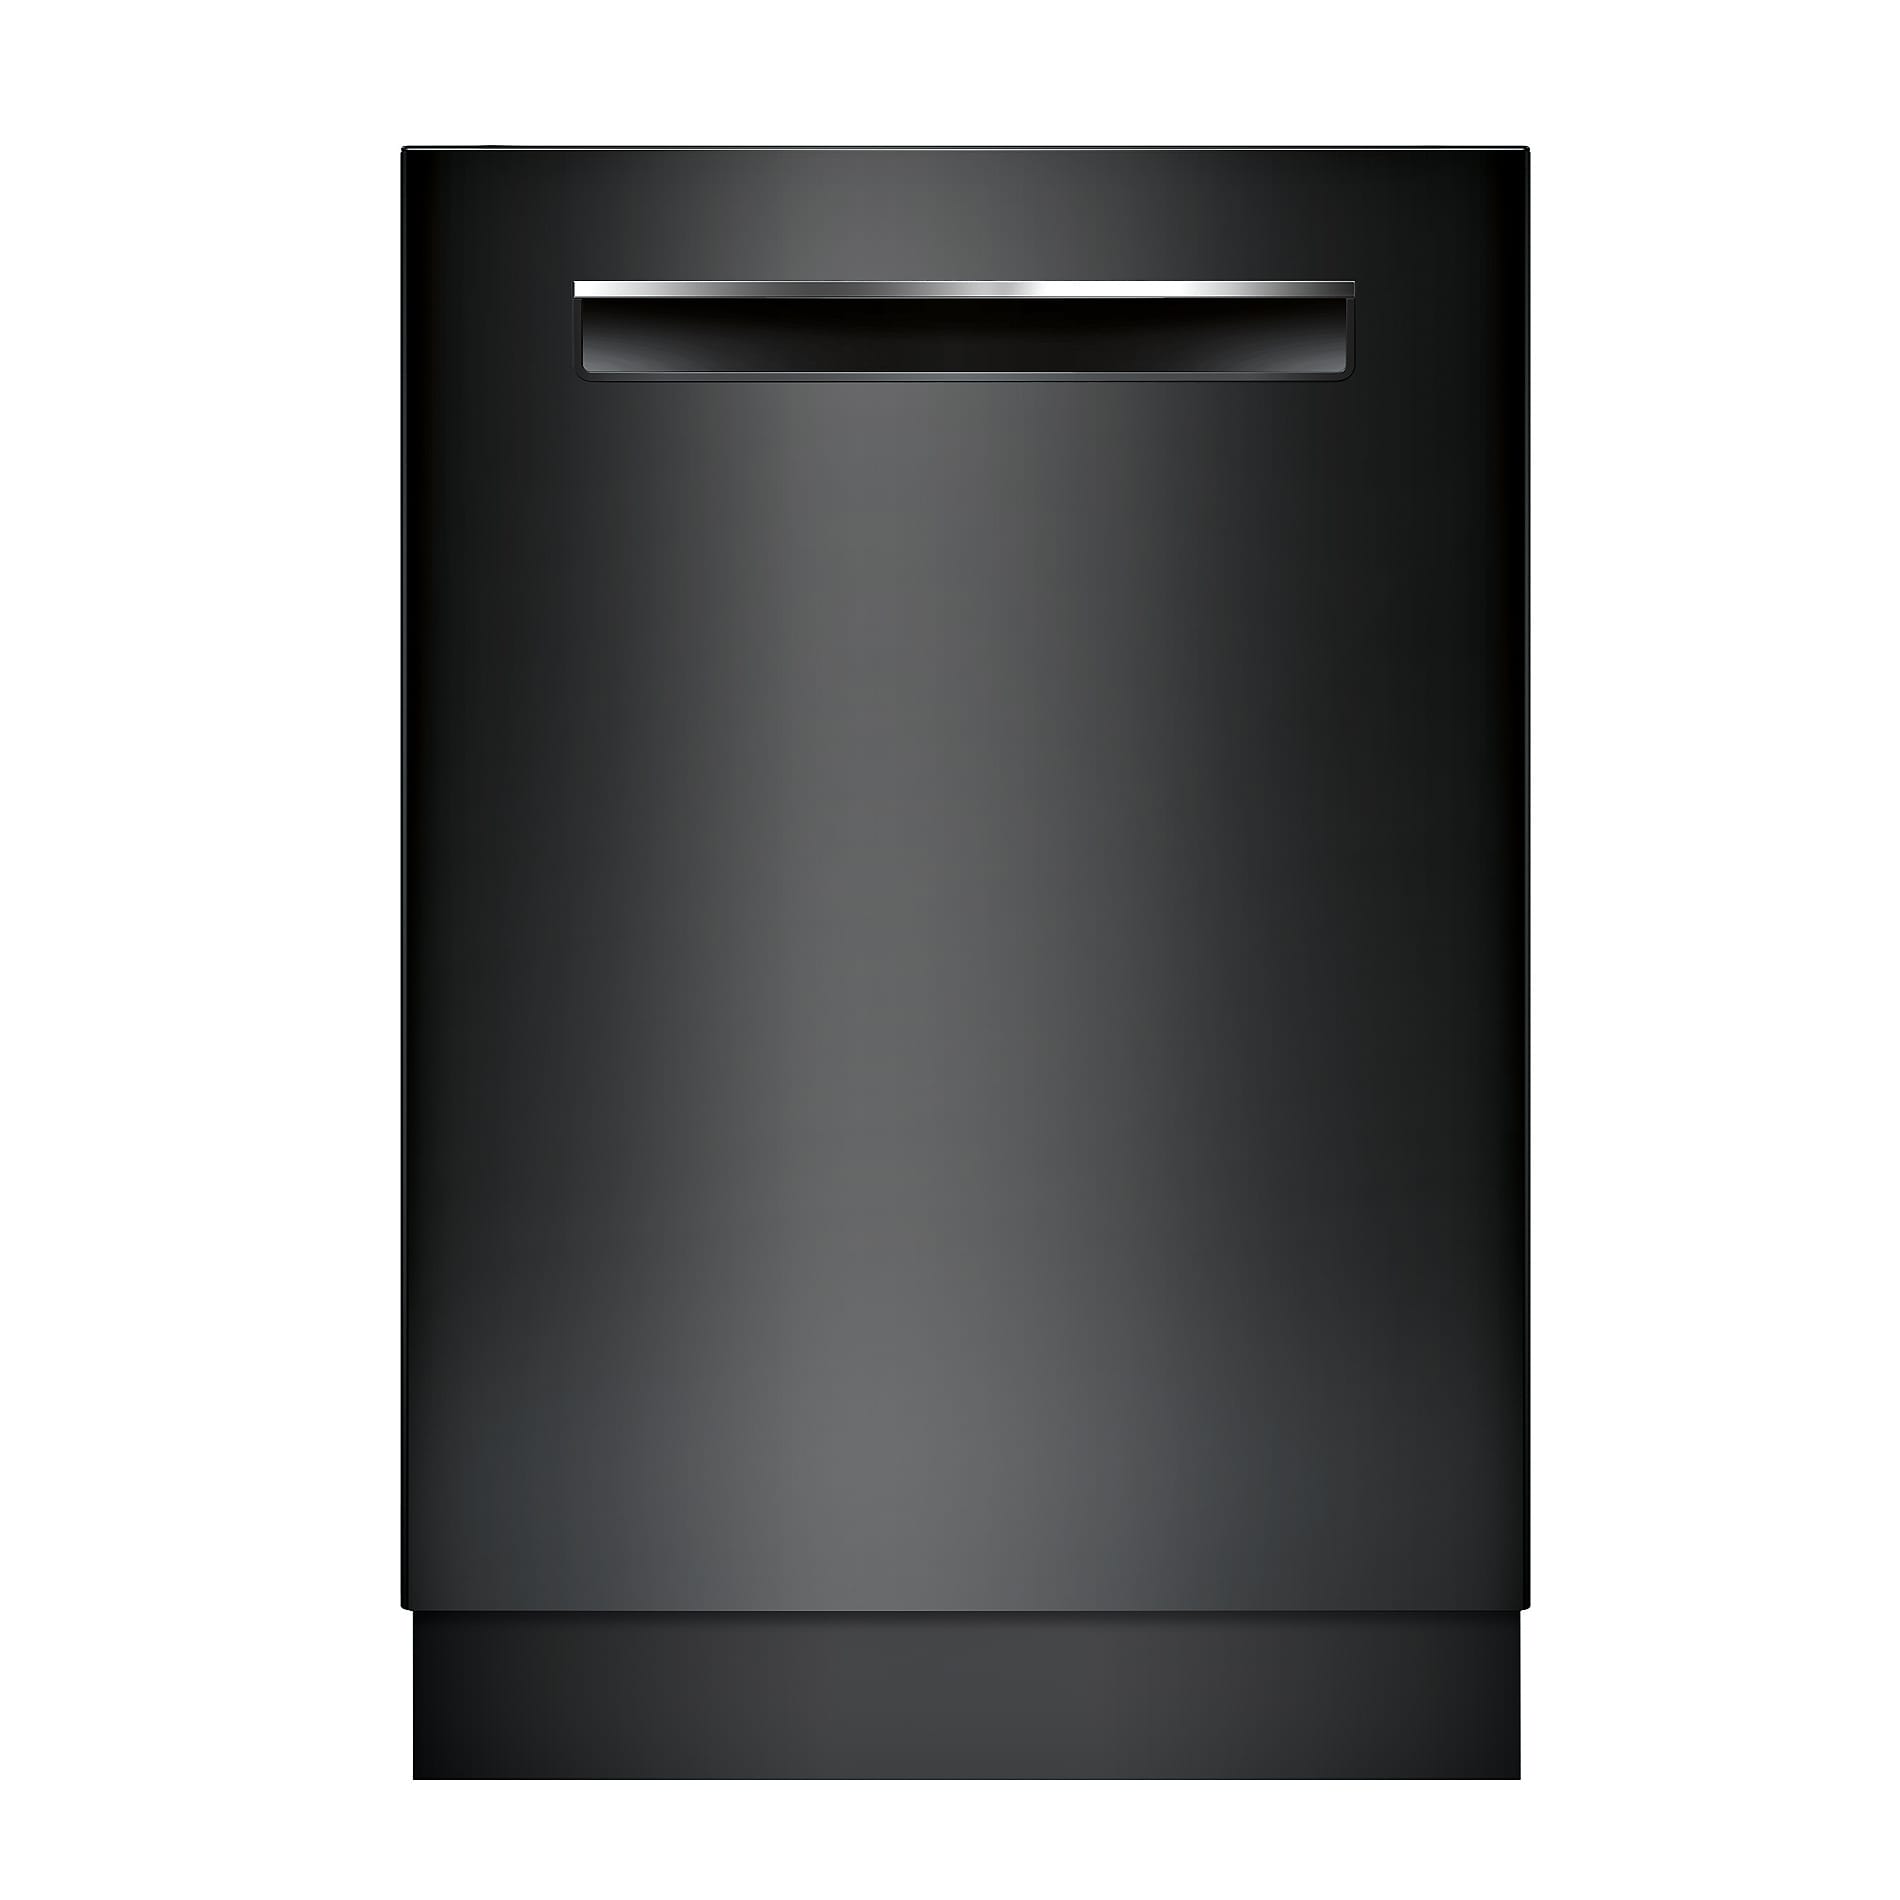 PC/タブレット PC周辺機器 Bosch 500 Series Top Control 24-in Built-In Dishwasher (Black 